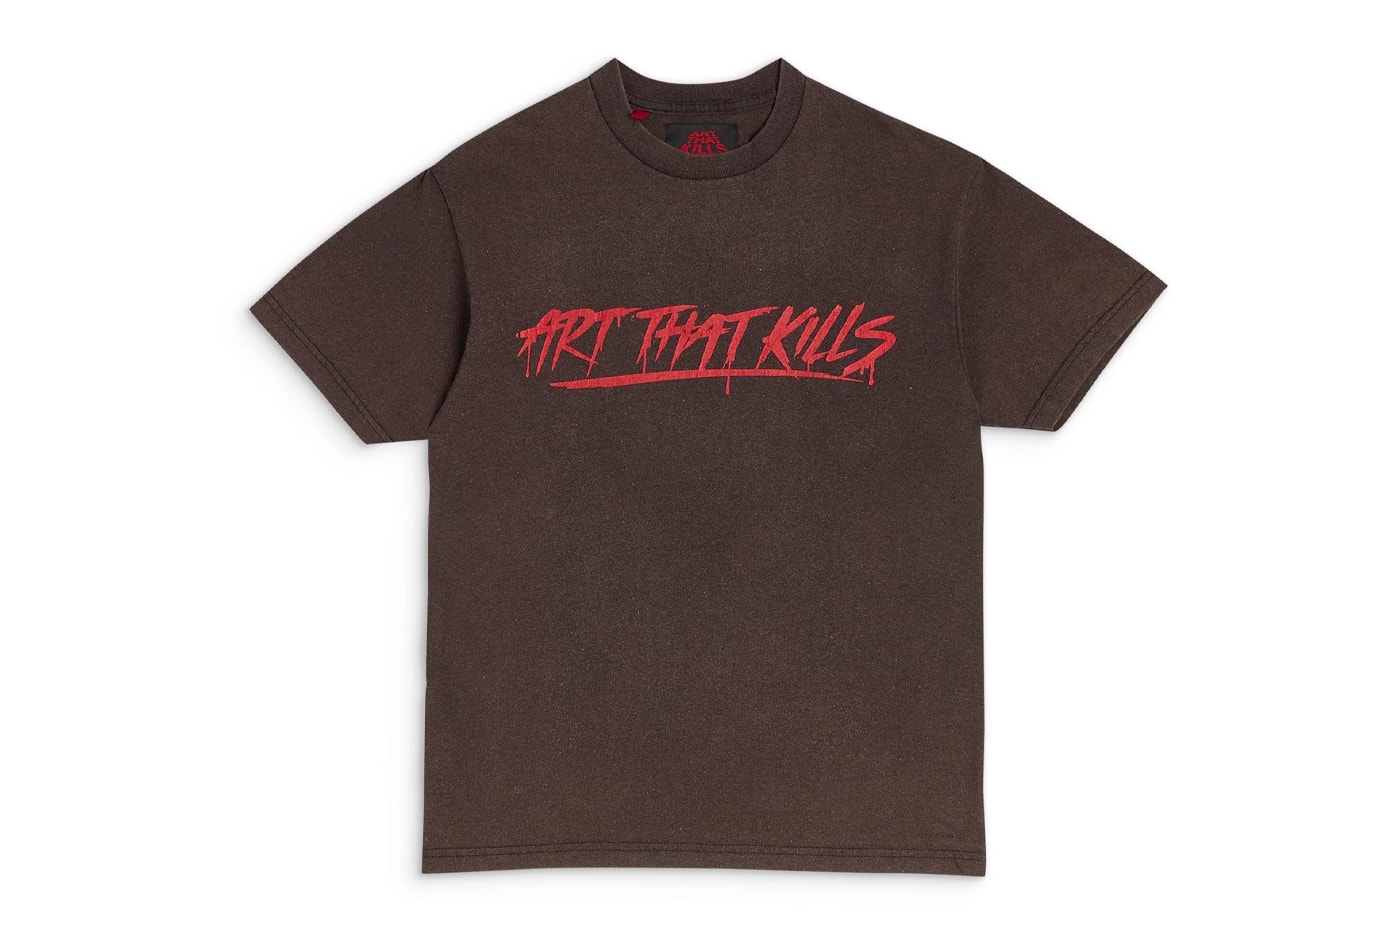 GALLERY DEPT. Founder Launches New "Art That Kills" Website for Old Merch semi affordable atk webs store 